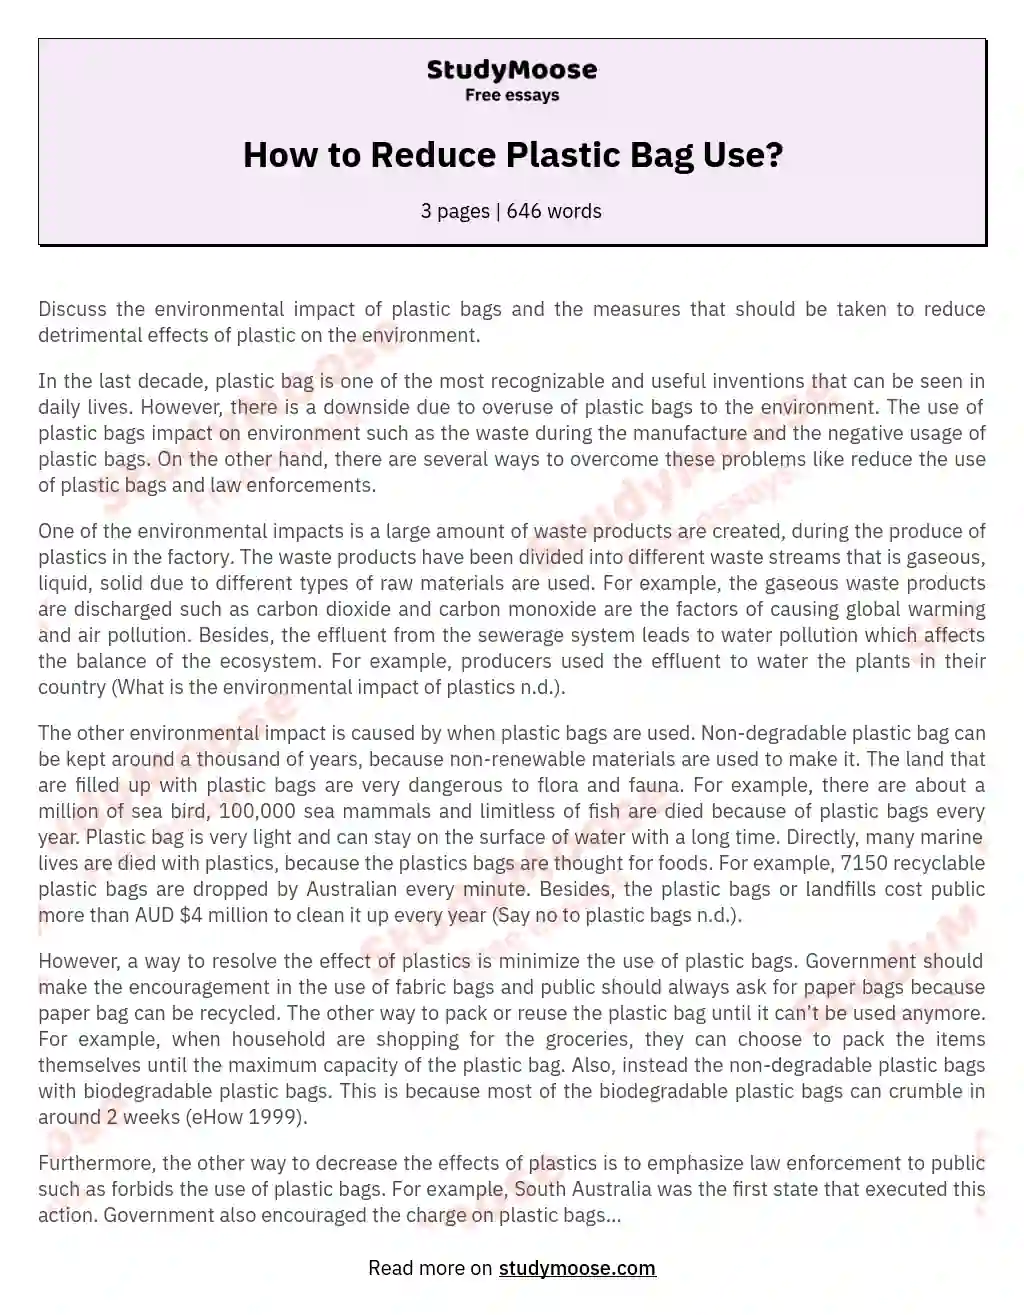 How to Reduce Plastic Bag Use? essay